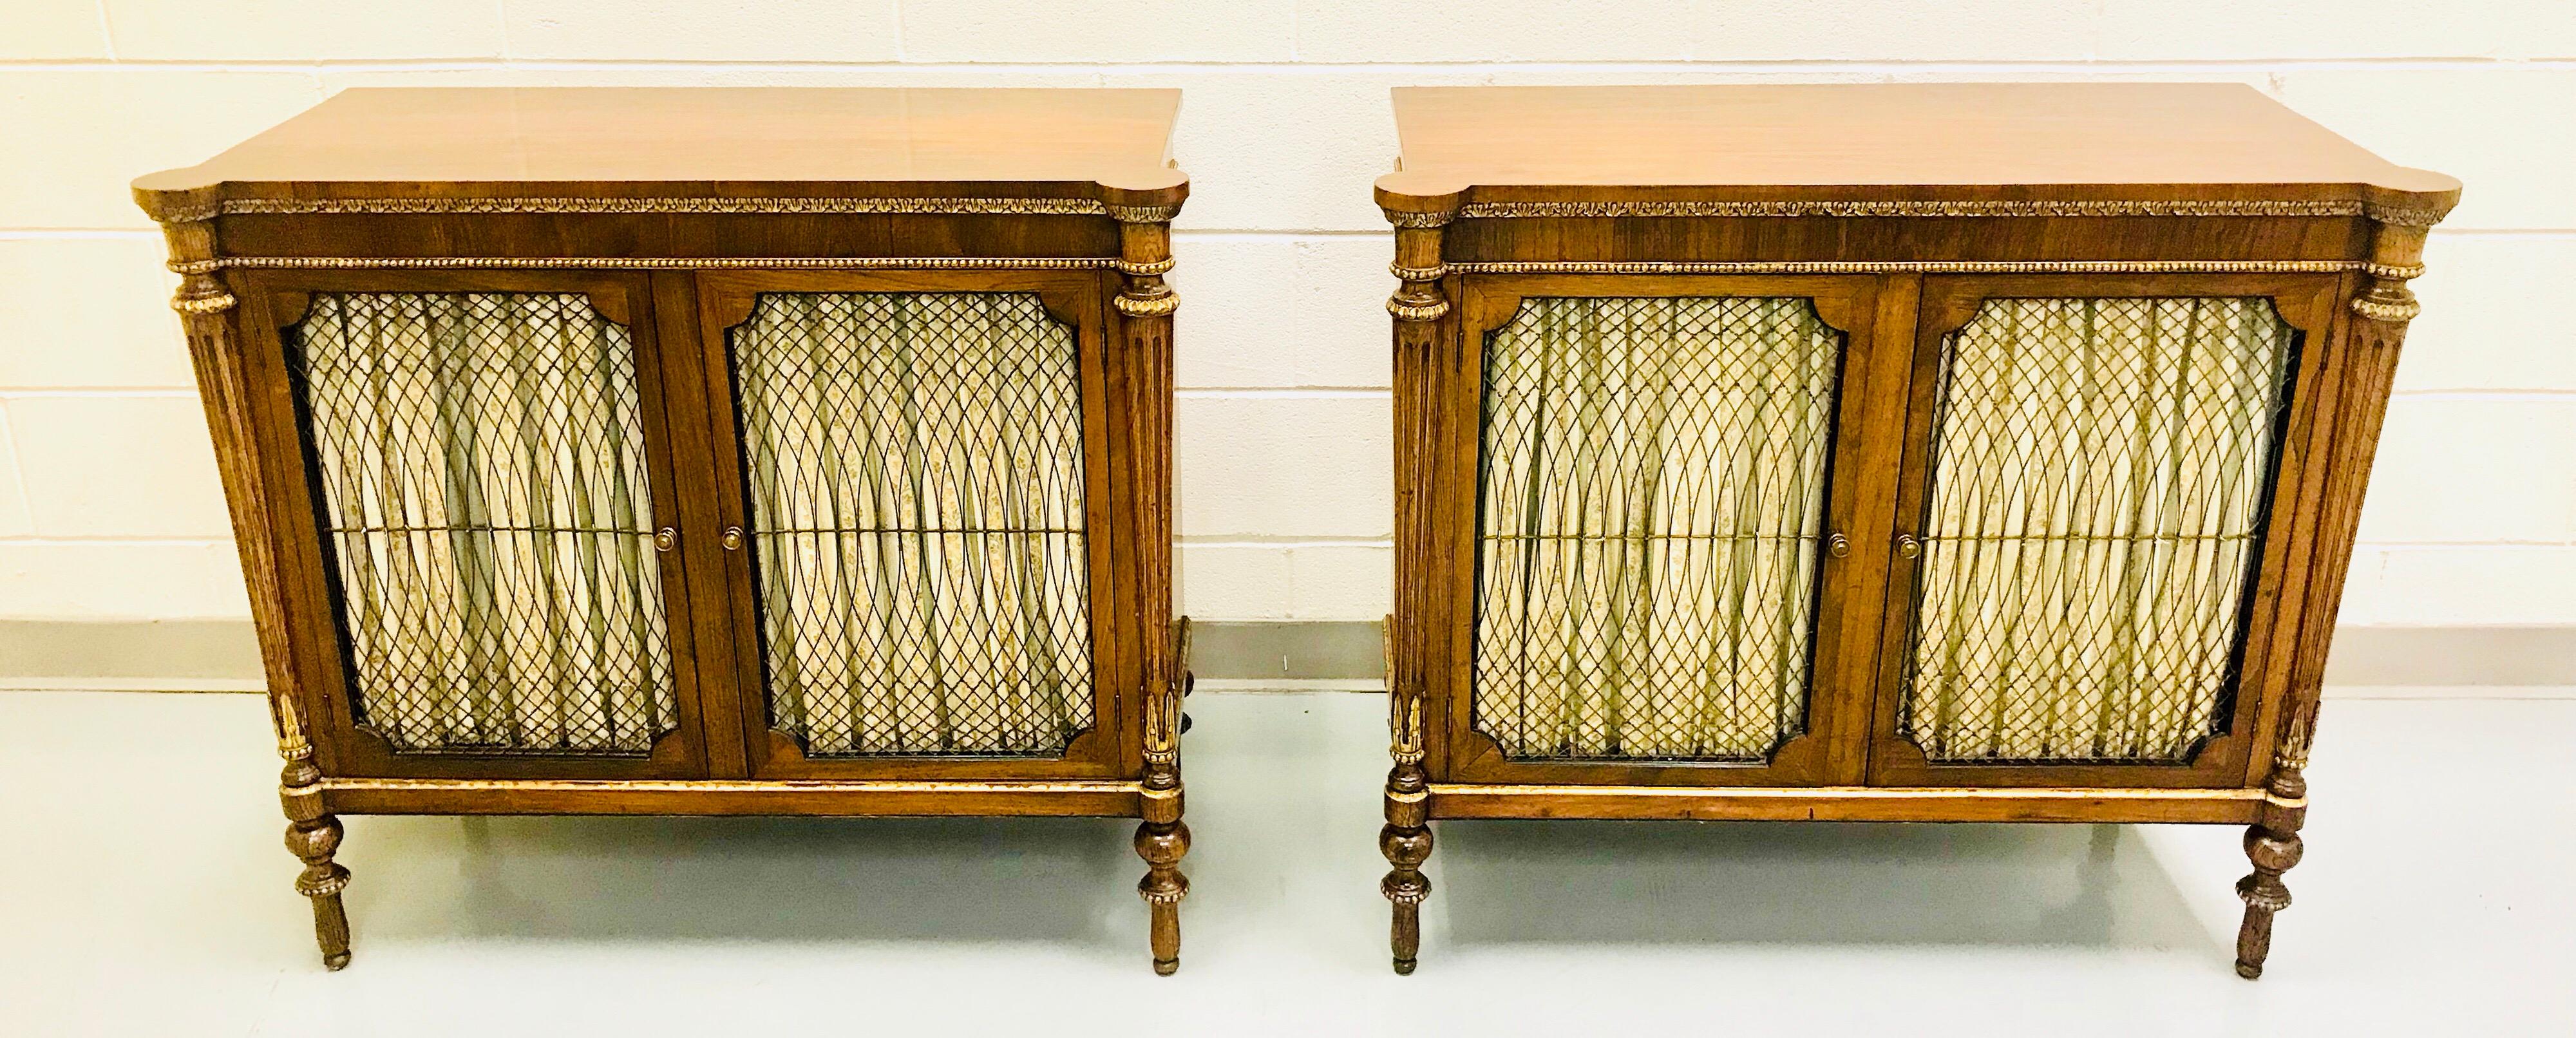 Pair of English Regency style rosewood and parcel-gilt cabinets.